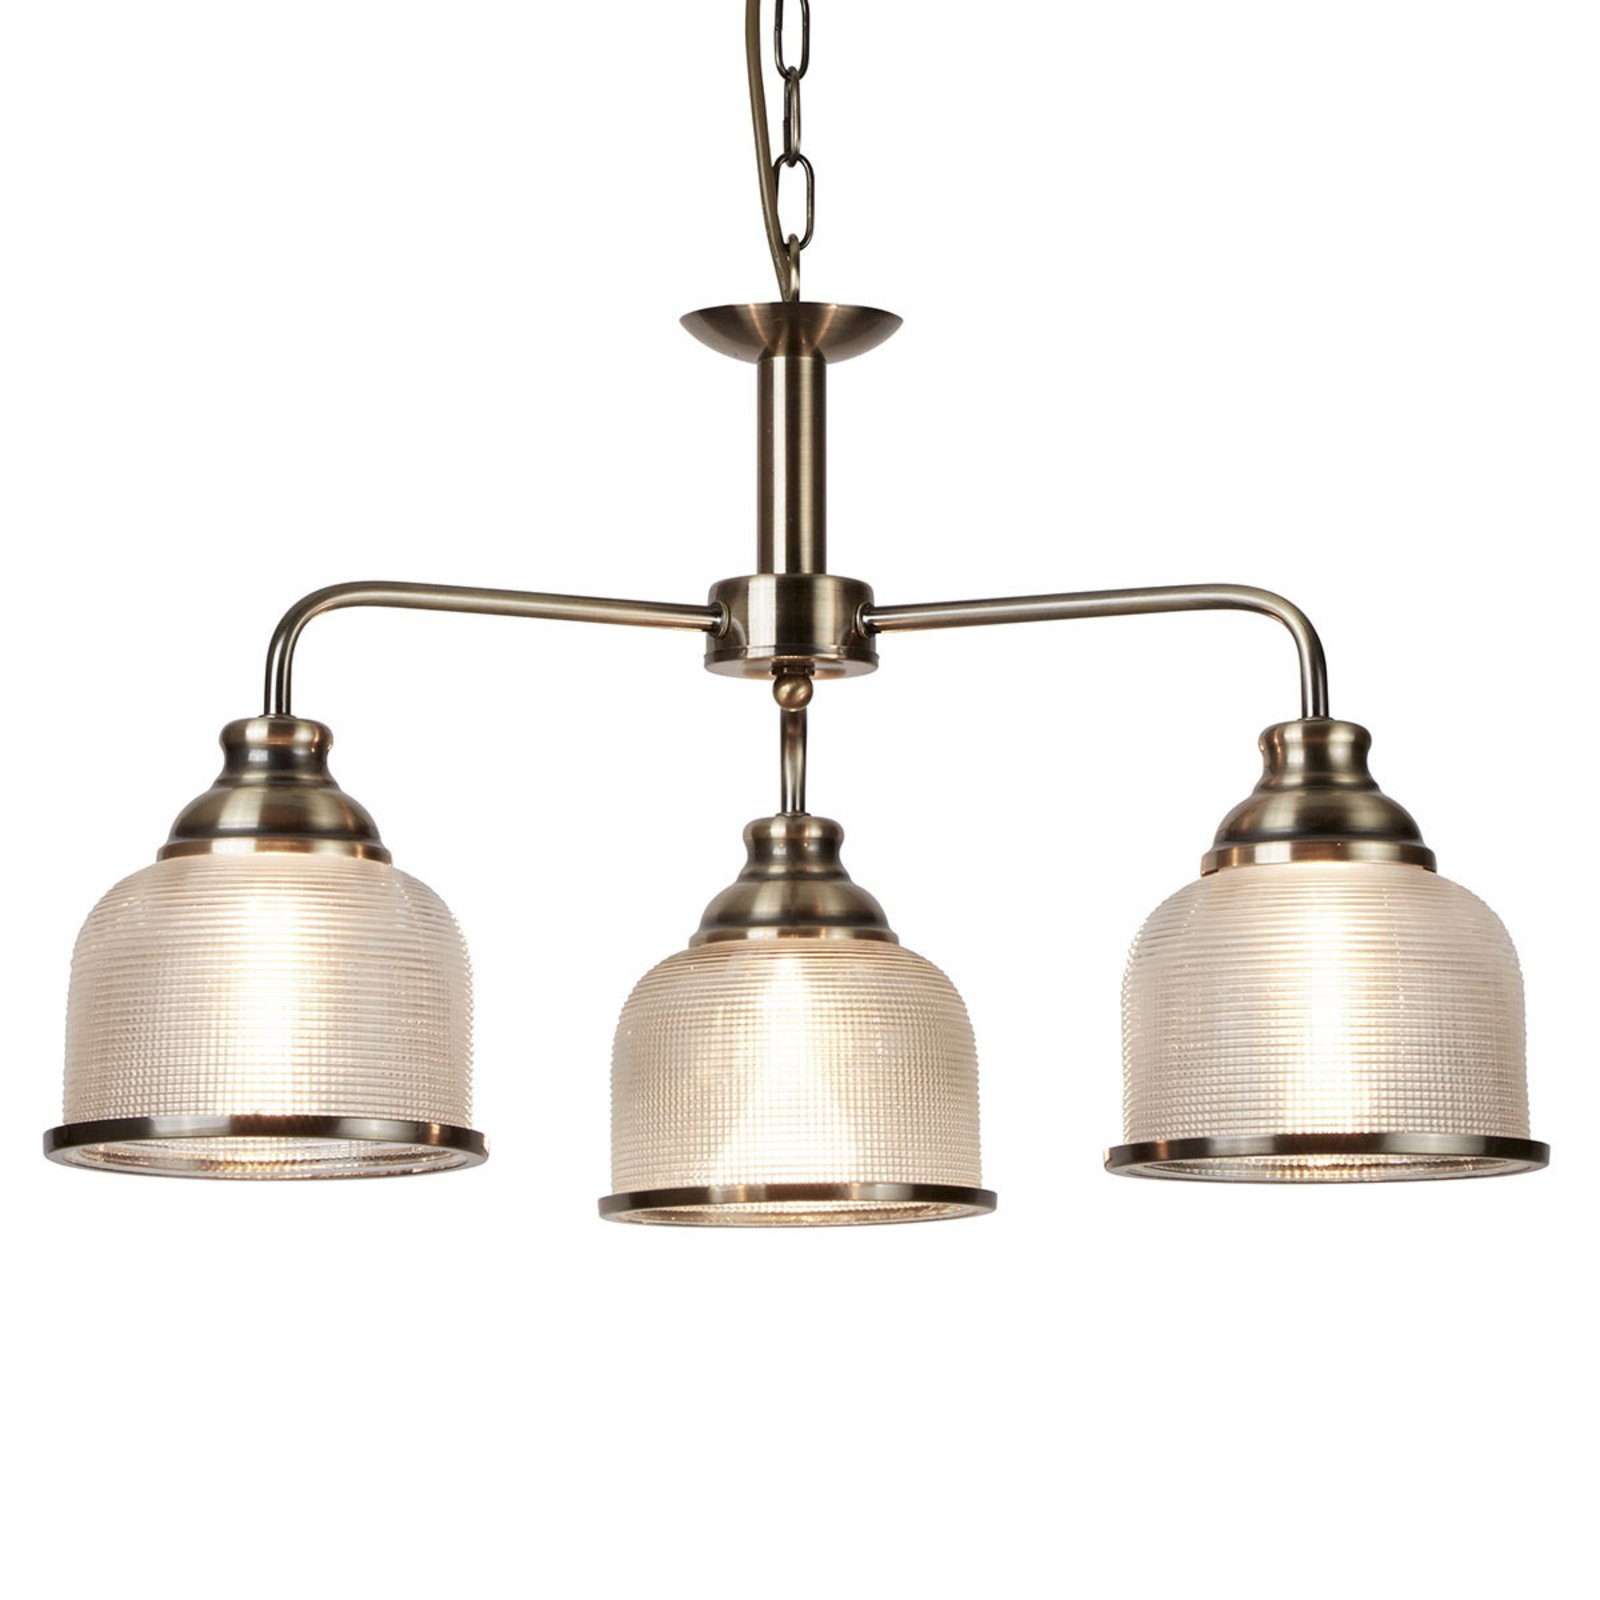 Classic/antique styled Bistro II hanging lamp